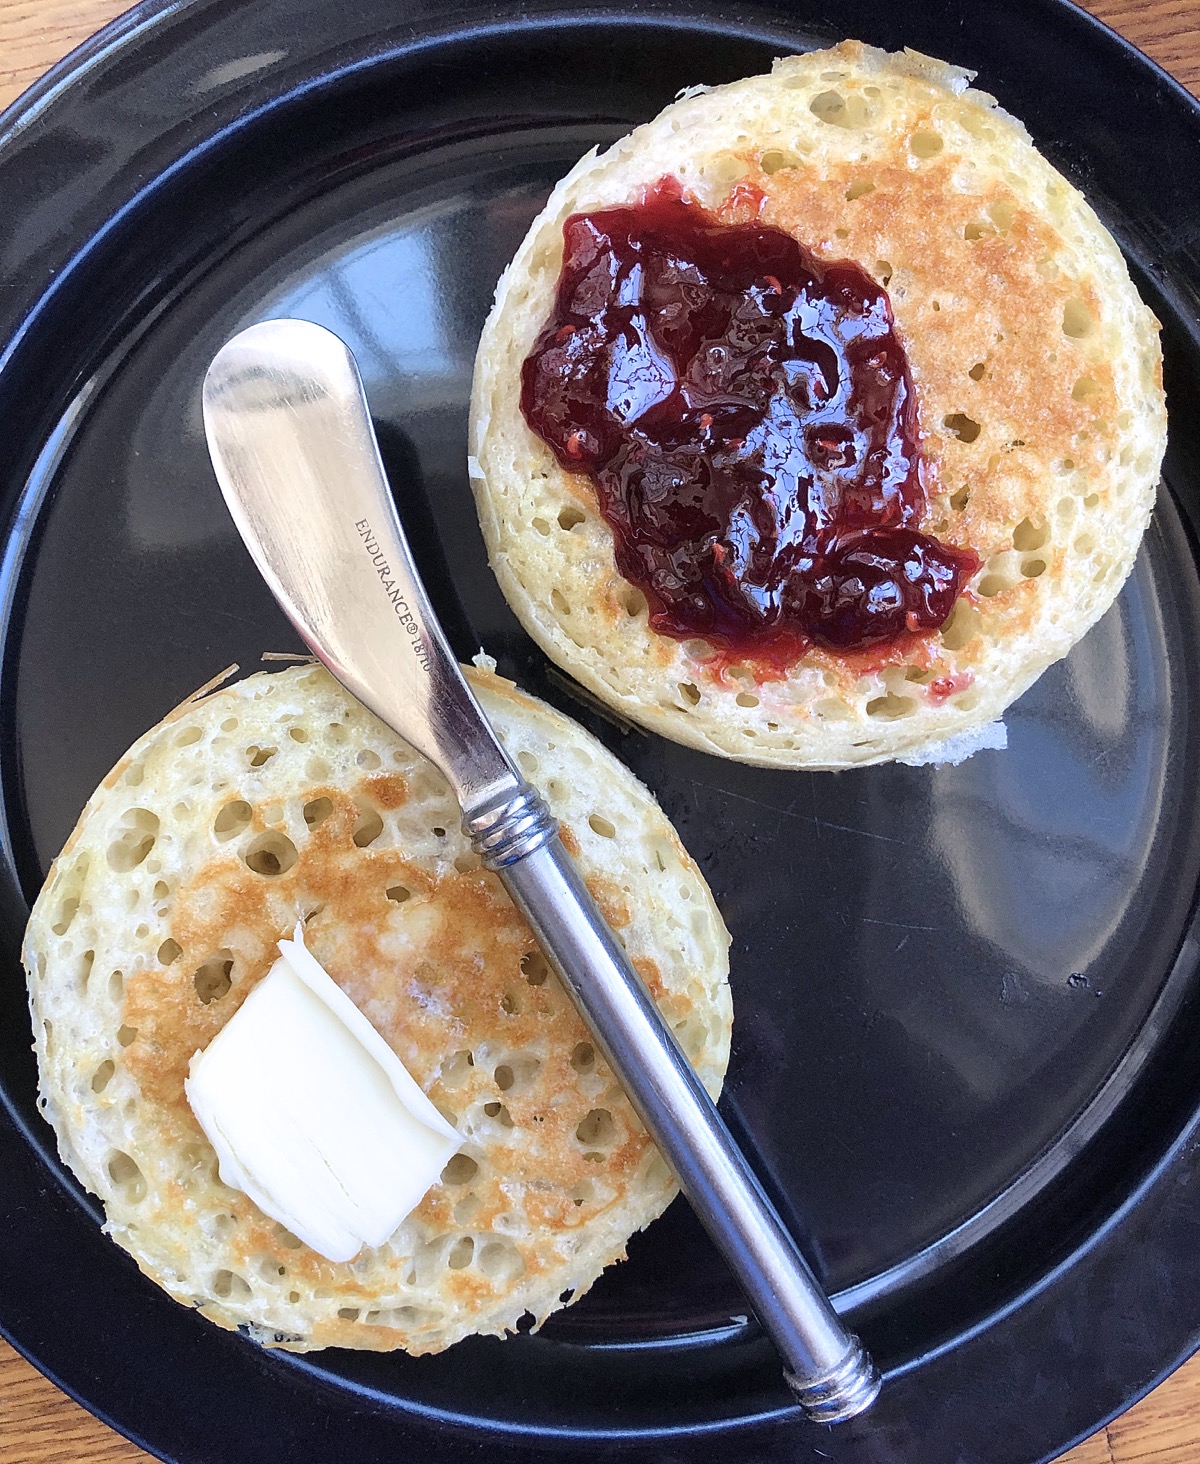 Two sourdough crumpets on a plate; one buttered, one spread with jam.